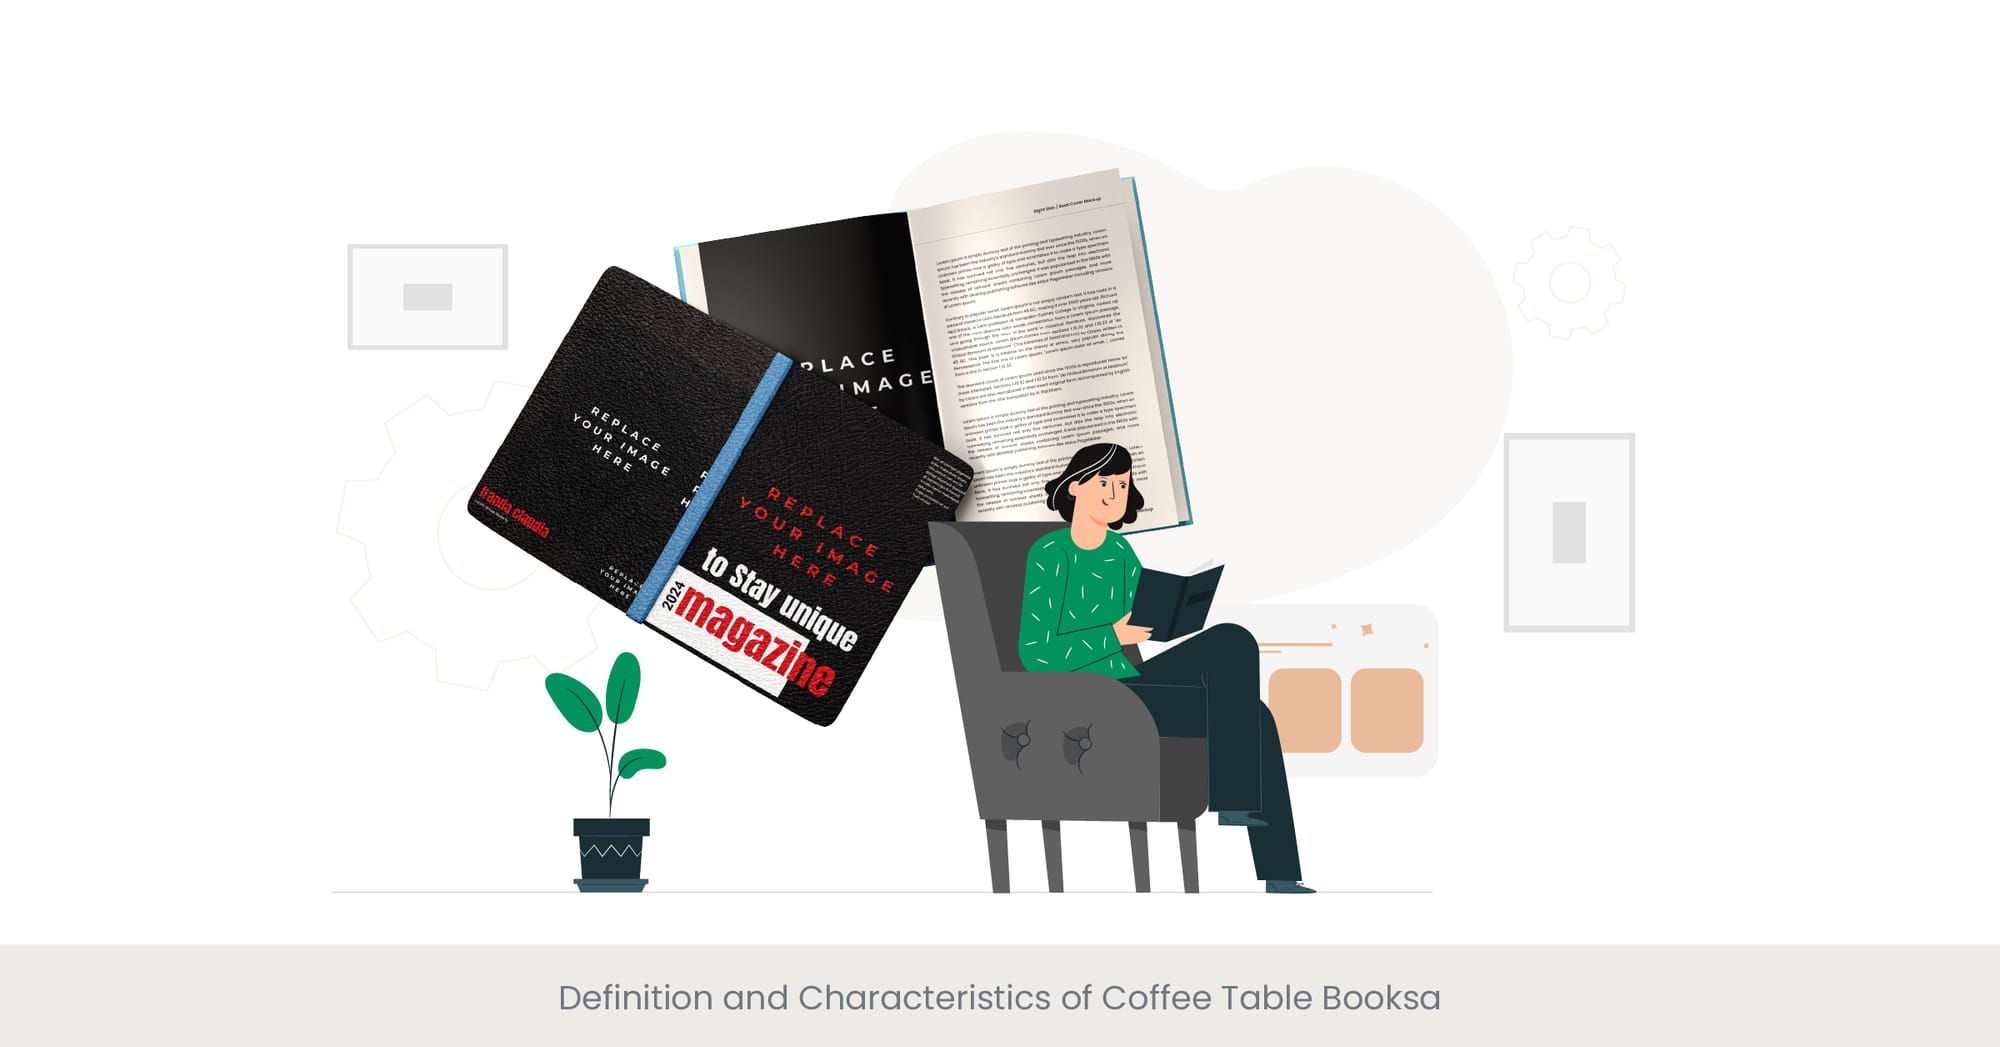 Definition and Characteristics of Coffee Table Books